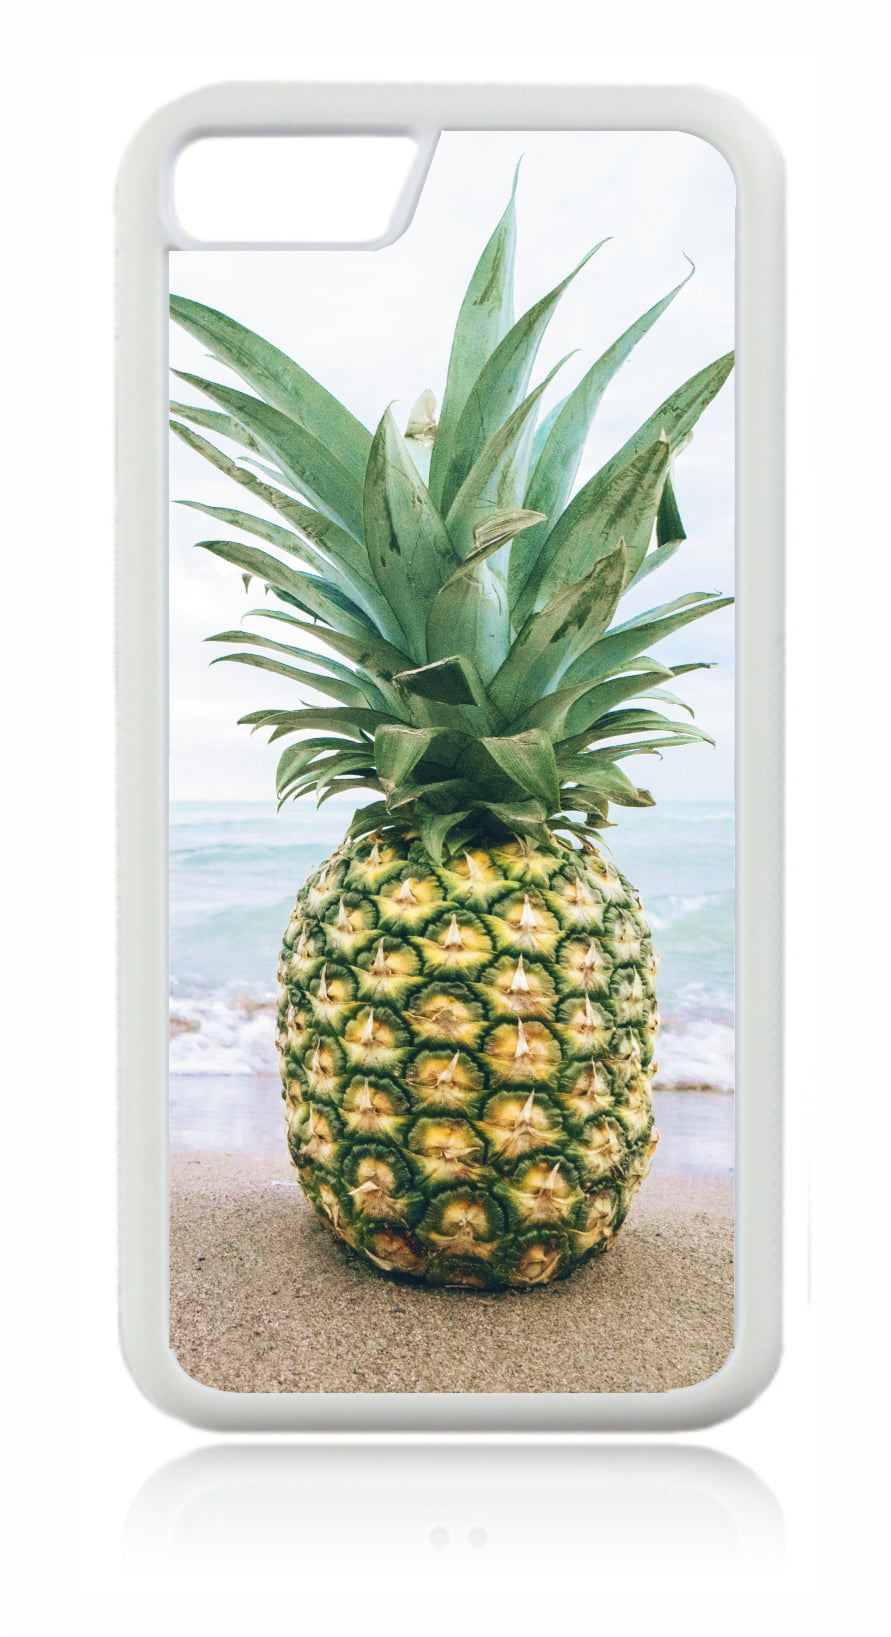 Tropical Pineapple on the Ocean Beach White Rubber Case for the Apple iPhone 6 Plus / iPhone 6s Plus - Apple iPhone 6 Plus Accessories -iPhone 6s Plus Accessories